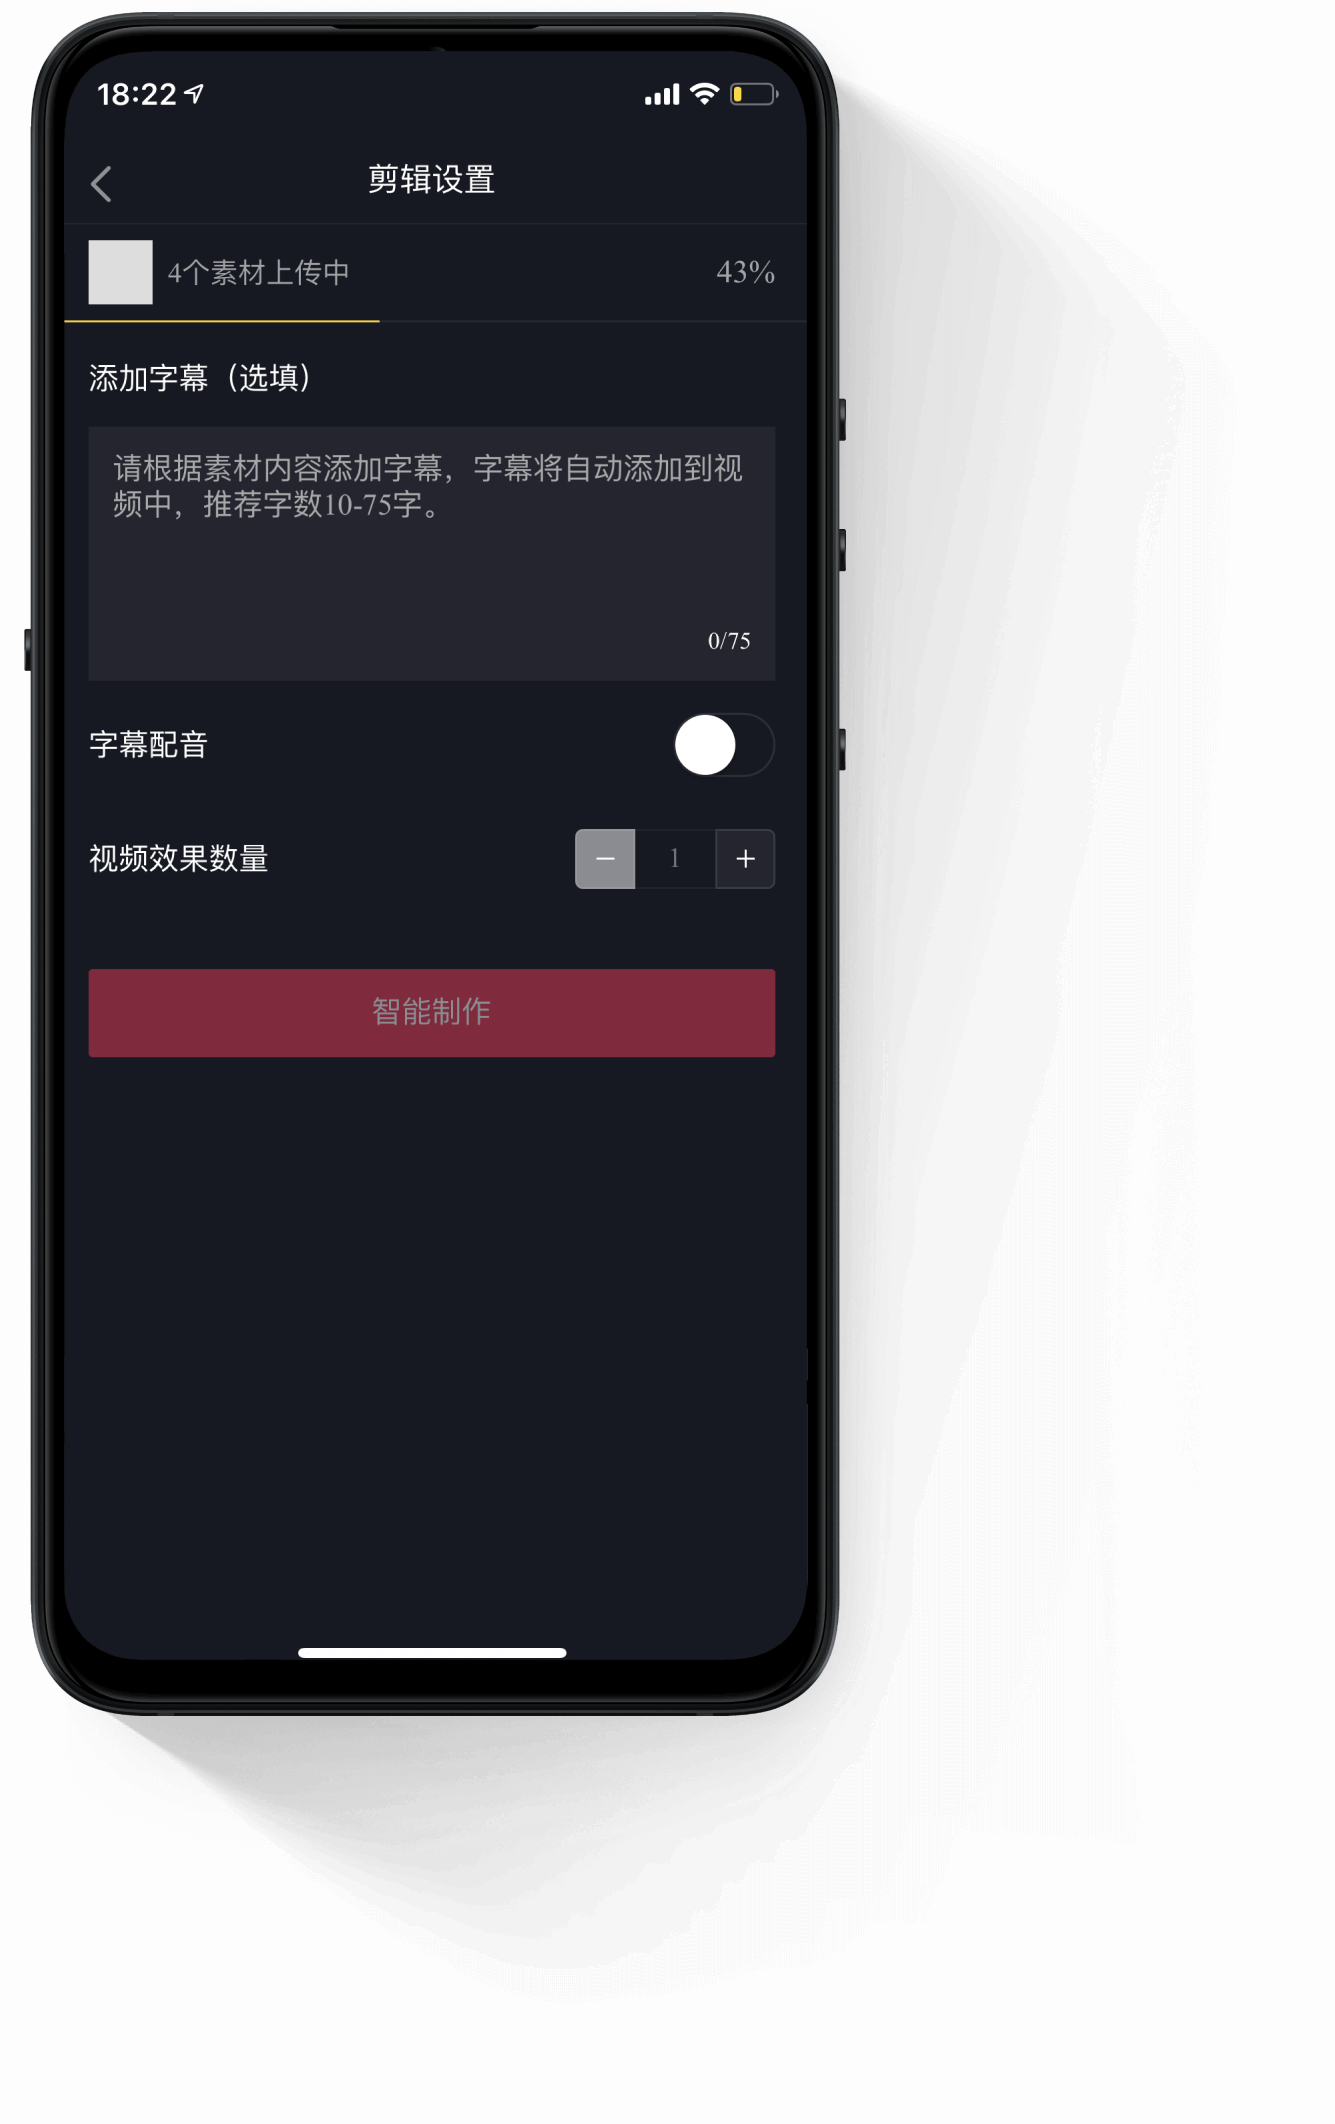 1、<strong>智能剪辑工具</strong>